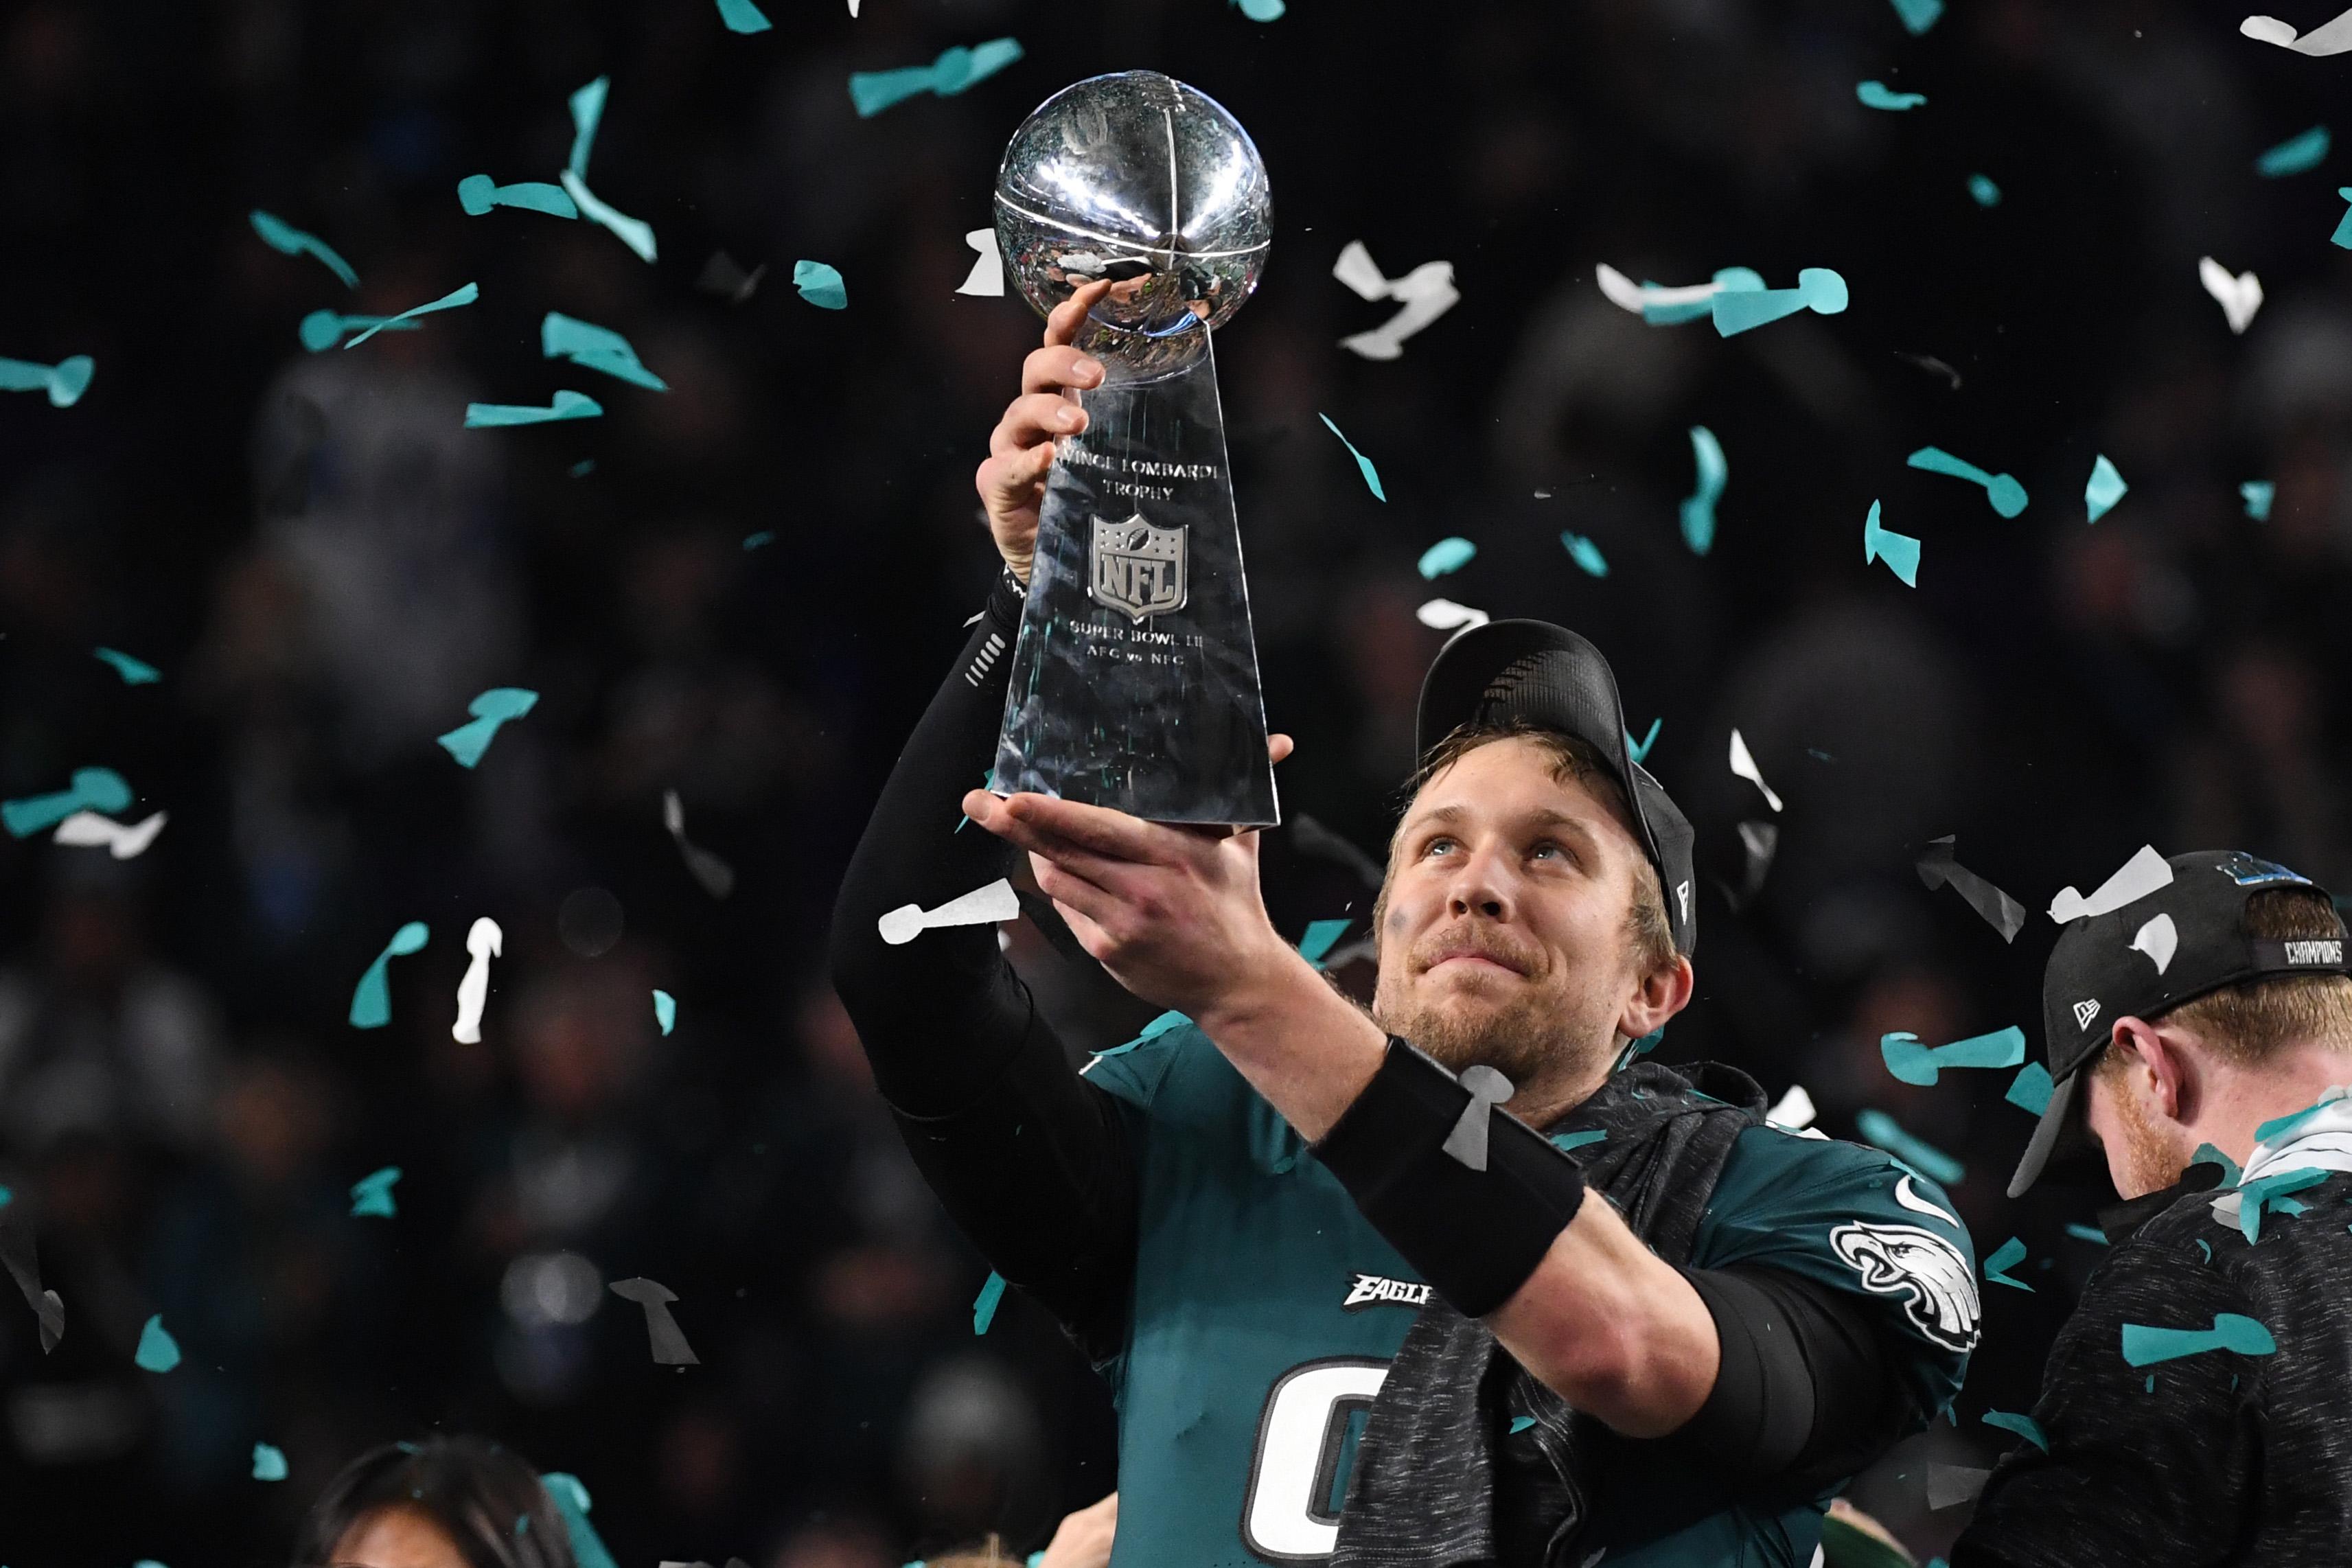 Quarterback Nick Foles of the Philadelphia Eagles celebrates following victory over the New England Patriots in  Super Bowl LII at US Bank Stadium in Minneapolis, Minnesota, on February 4, 2018.
The Philadelphia Eagles scored a stunning 41-33 upset victory over the New England Patriots to win their first ever Super Bowl after a costly Tom Brady fumble ended the quarterback's tilt at history.
 / AFP PHOTO / TIMOTHY A. CLARY        (Photo credit should read TIMOTHY A. CLARY/AFP/Getty Images)